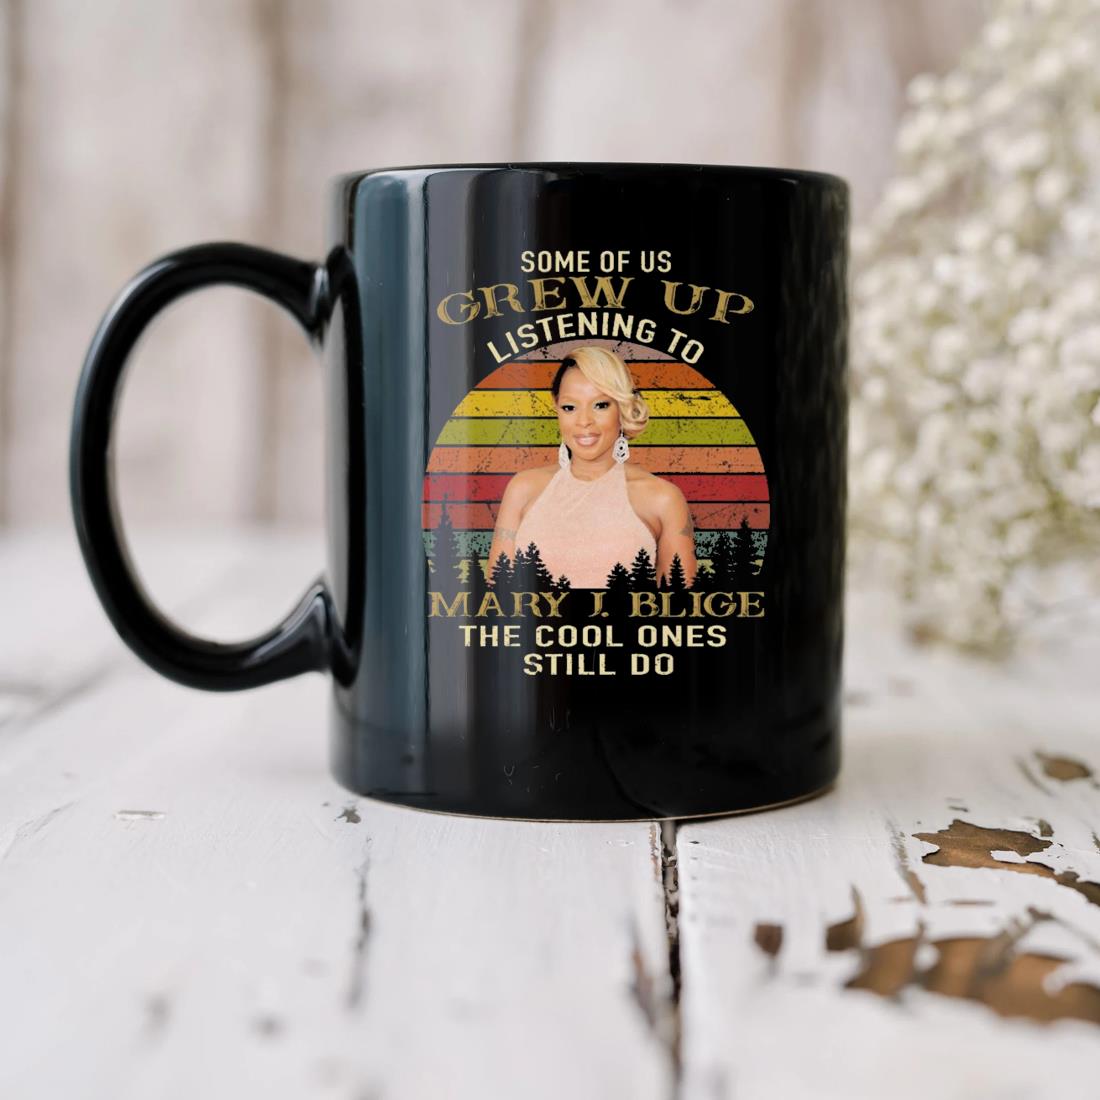 Some Of Us Grew Us Listening To Mary J Blige The Cool Ones Still Do Vintage Mug